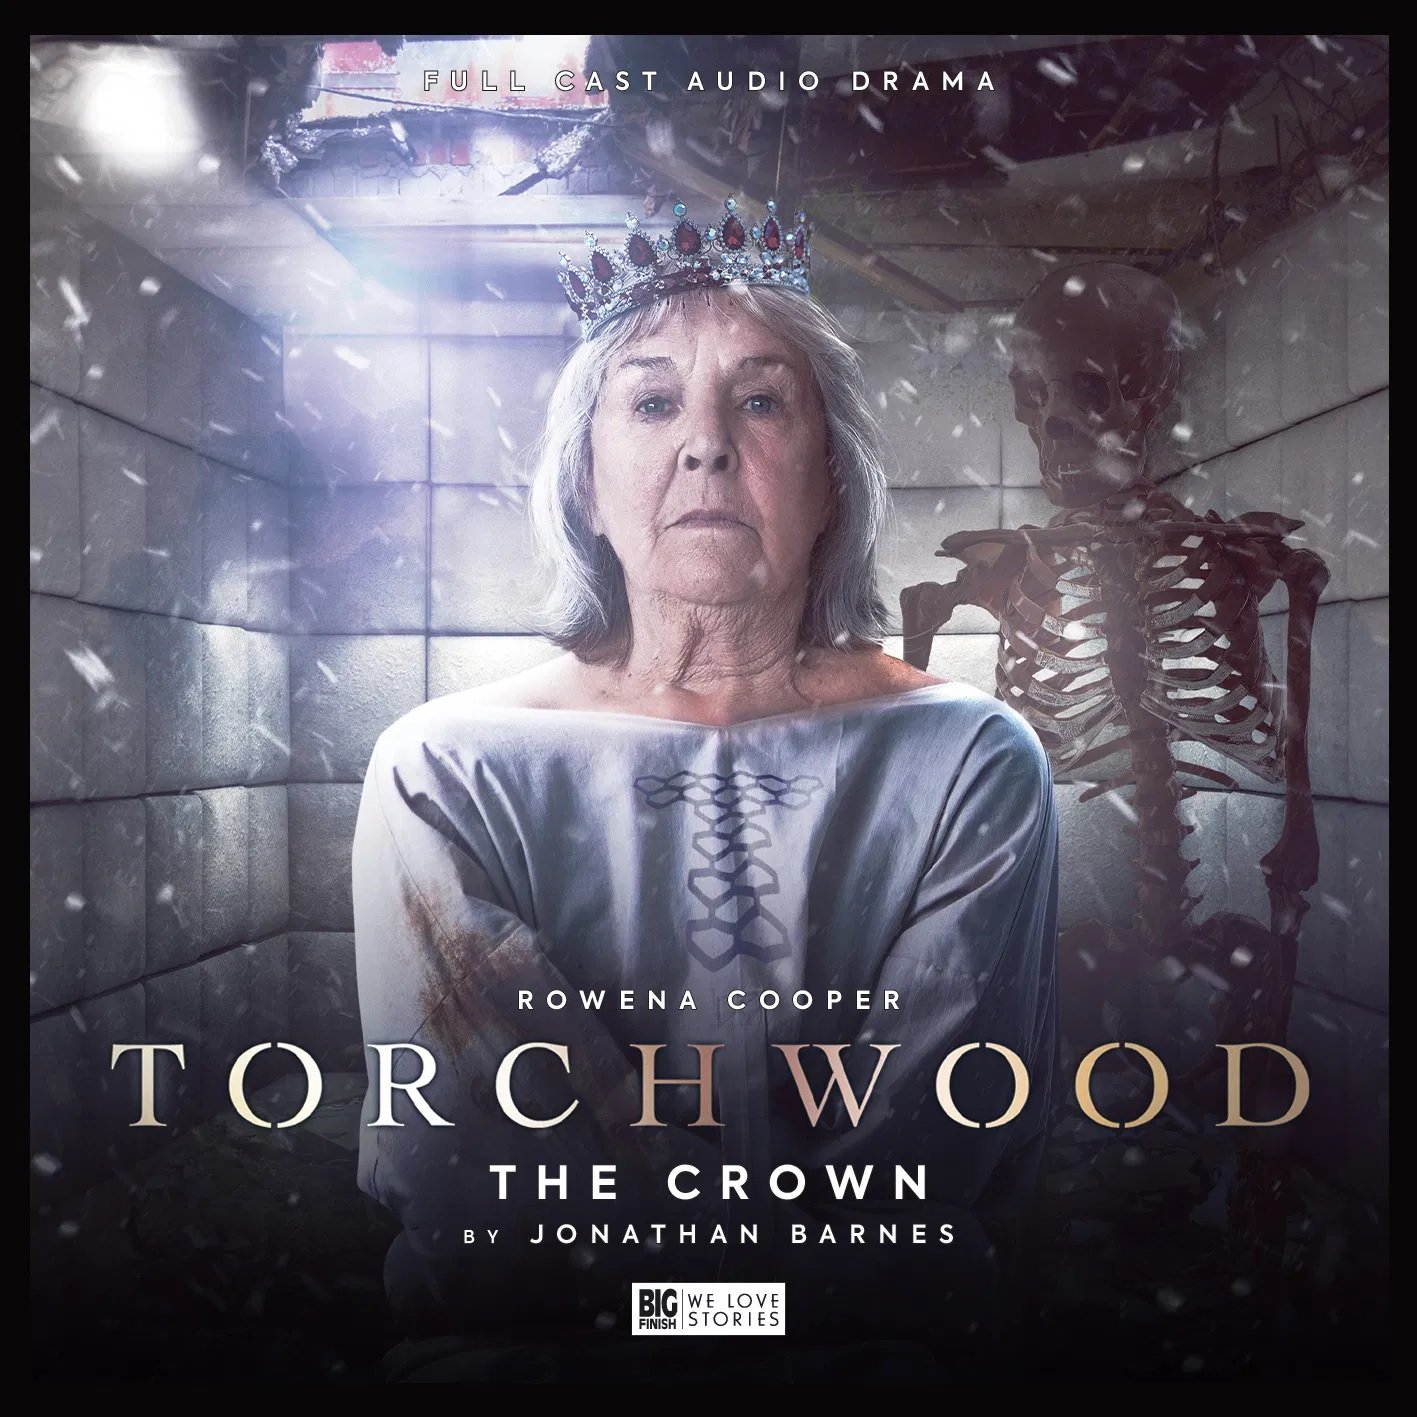 Reviewed: Big Finish’s Torchwood – The Crown